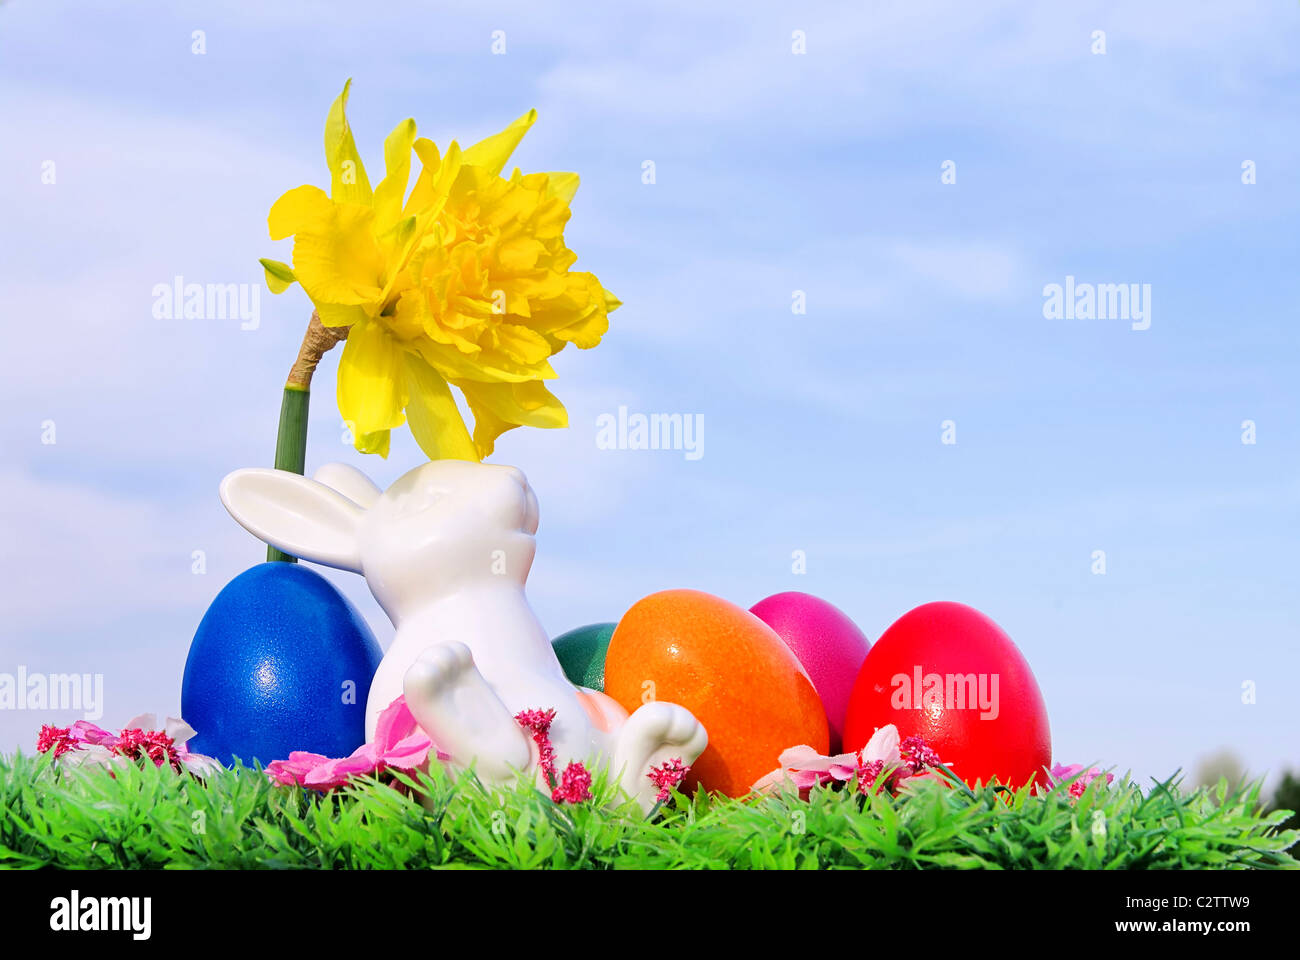 Osterhase auf Blumenwiese - easter bunny on flower meadow 03 Stock Photo